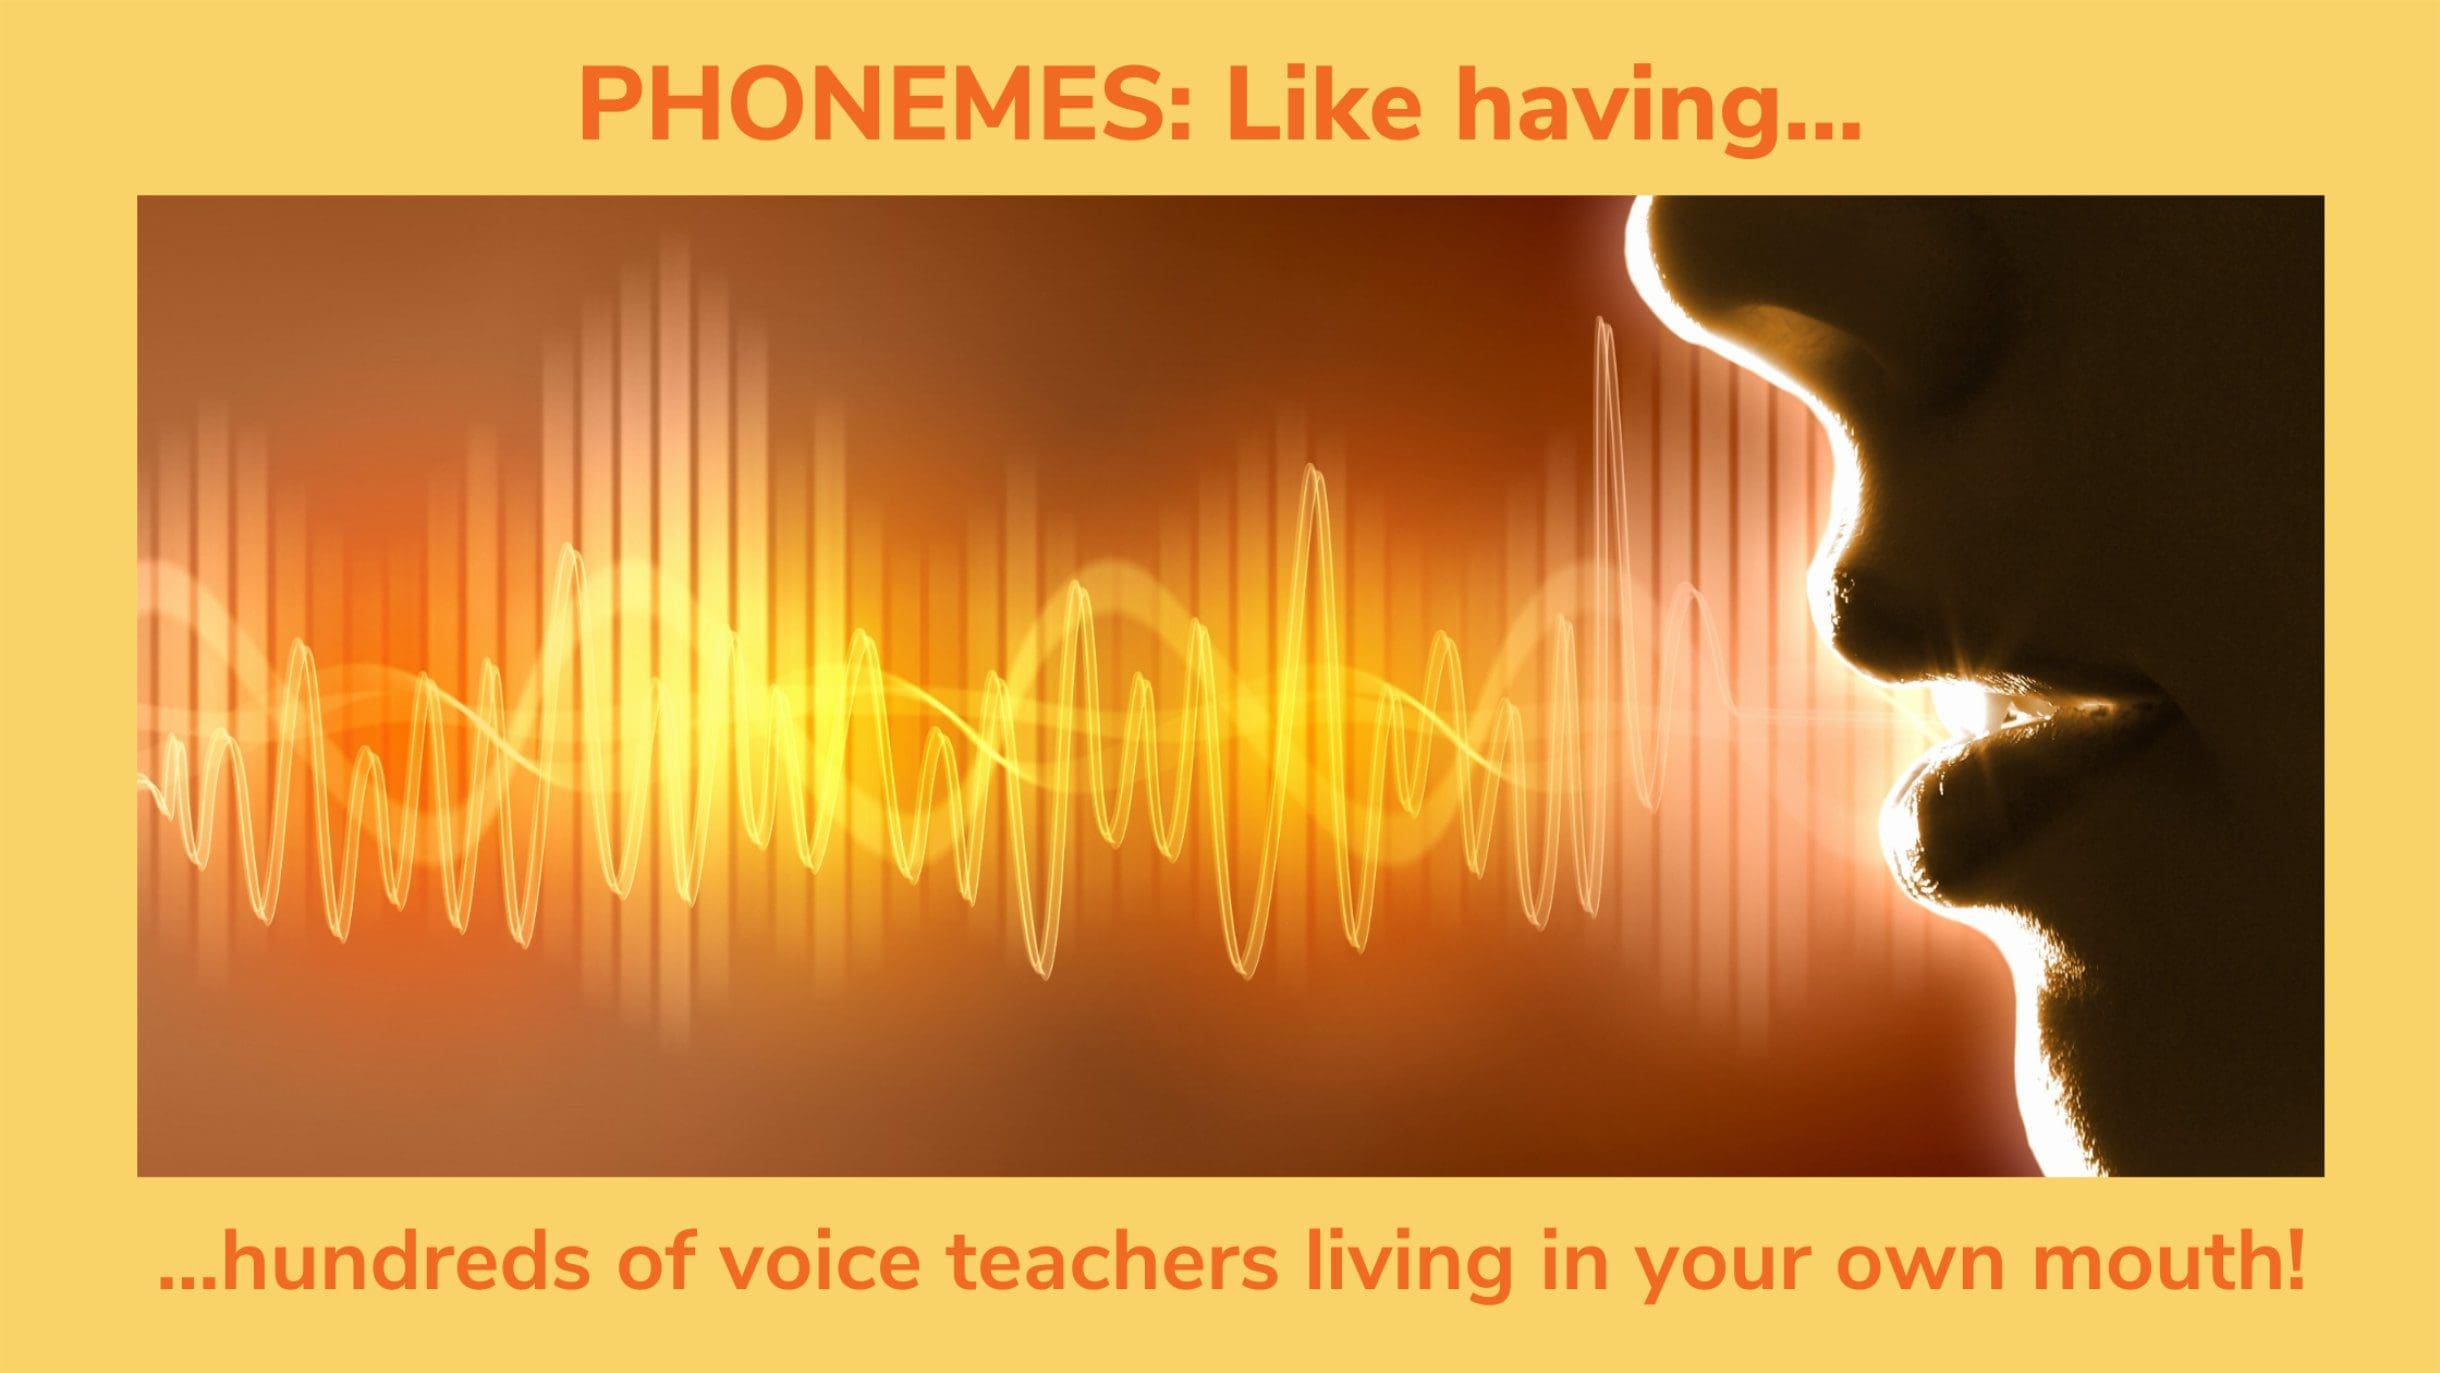 Phonemes - Like having hundreds of Voice Teachers Living in Your Own Mouth.